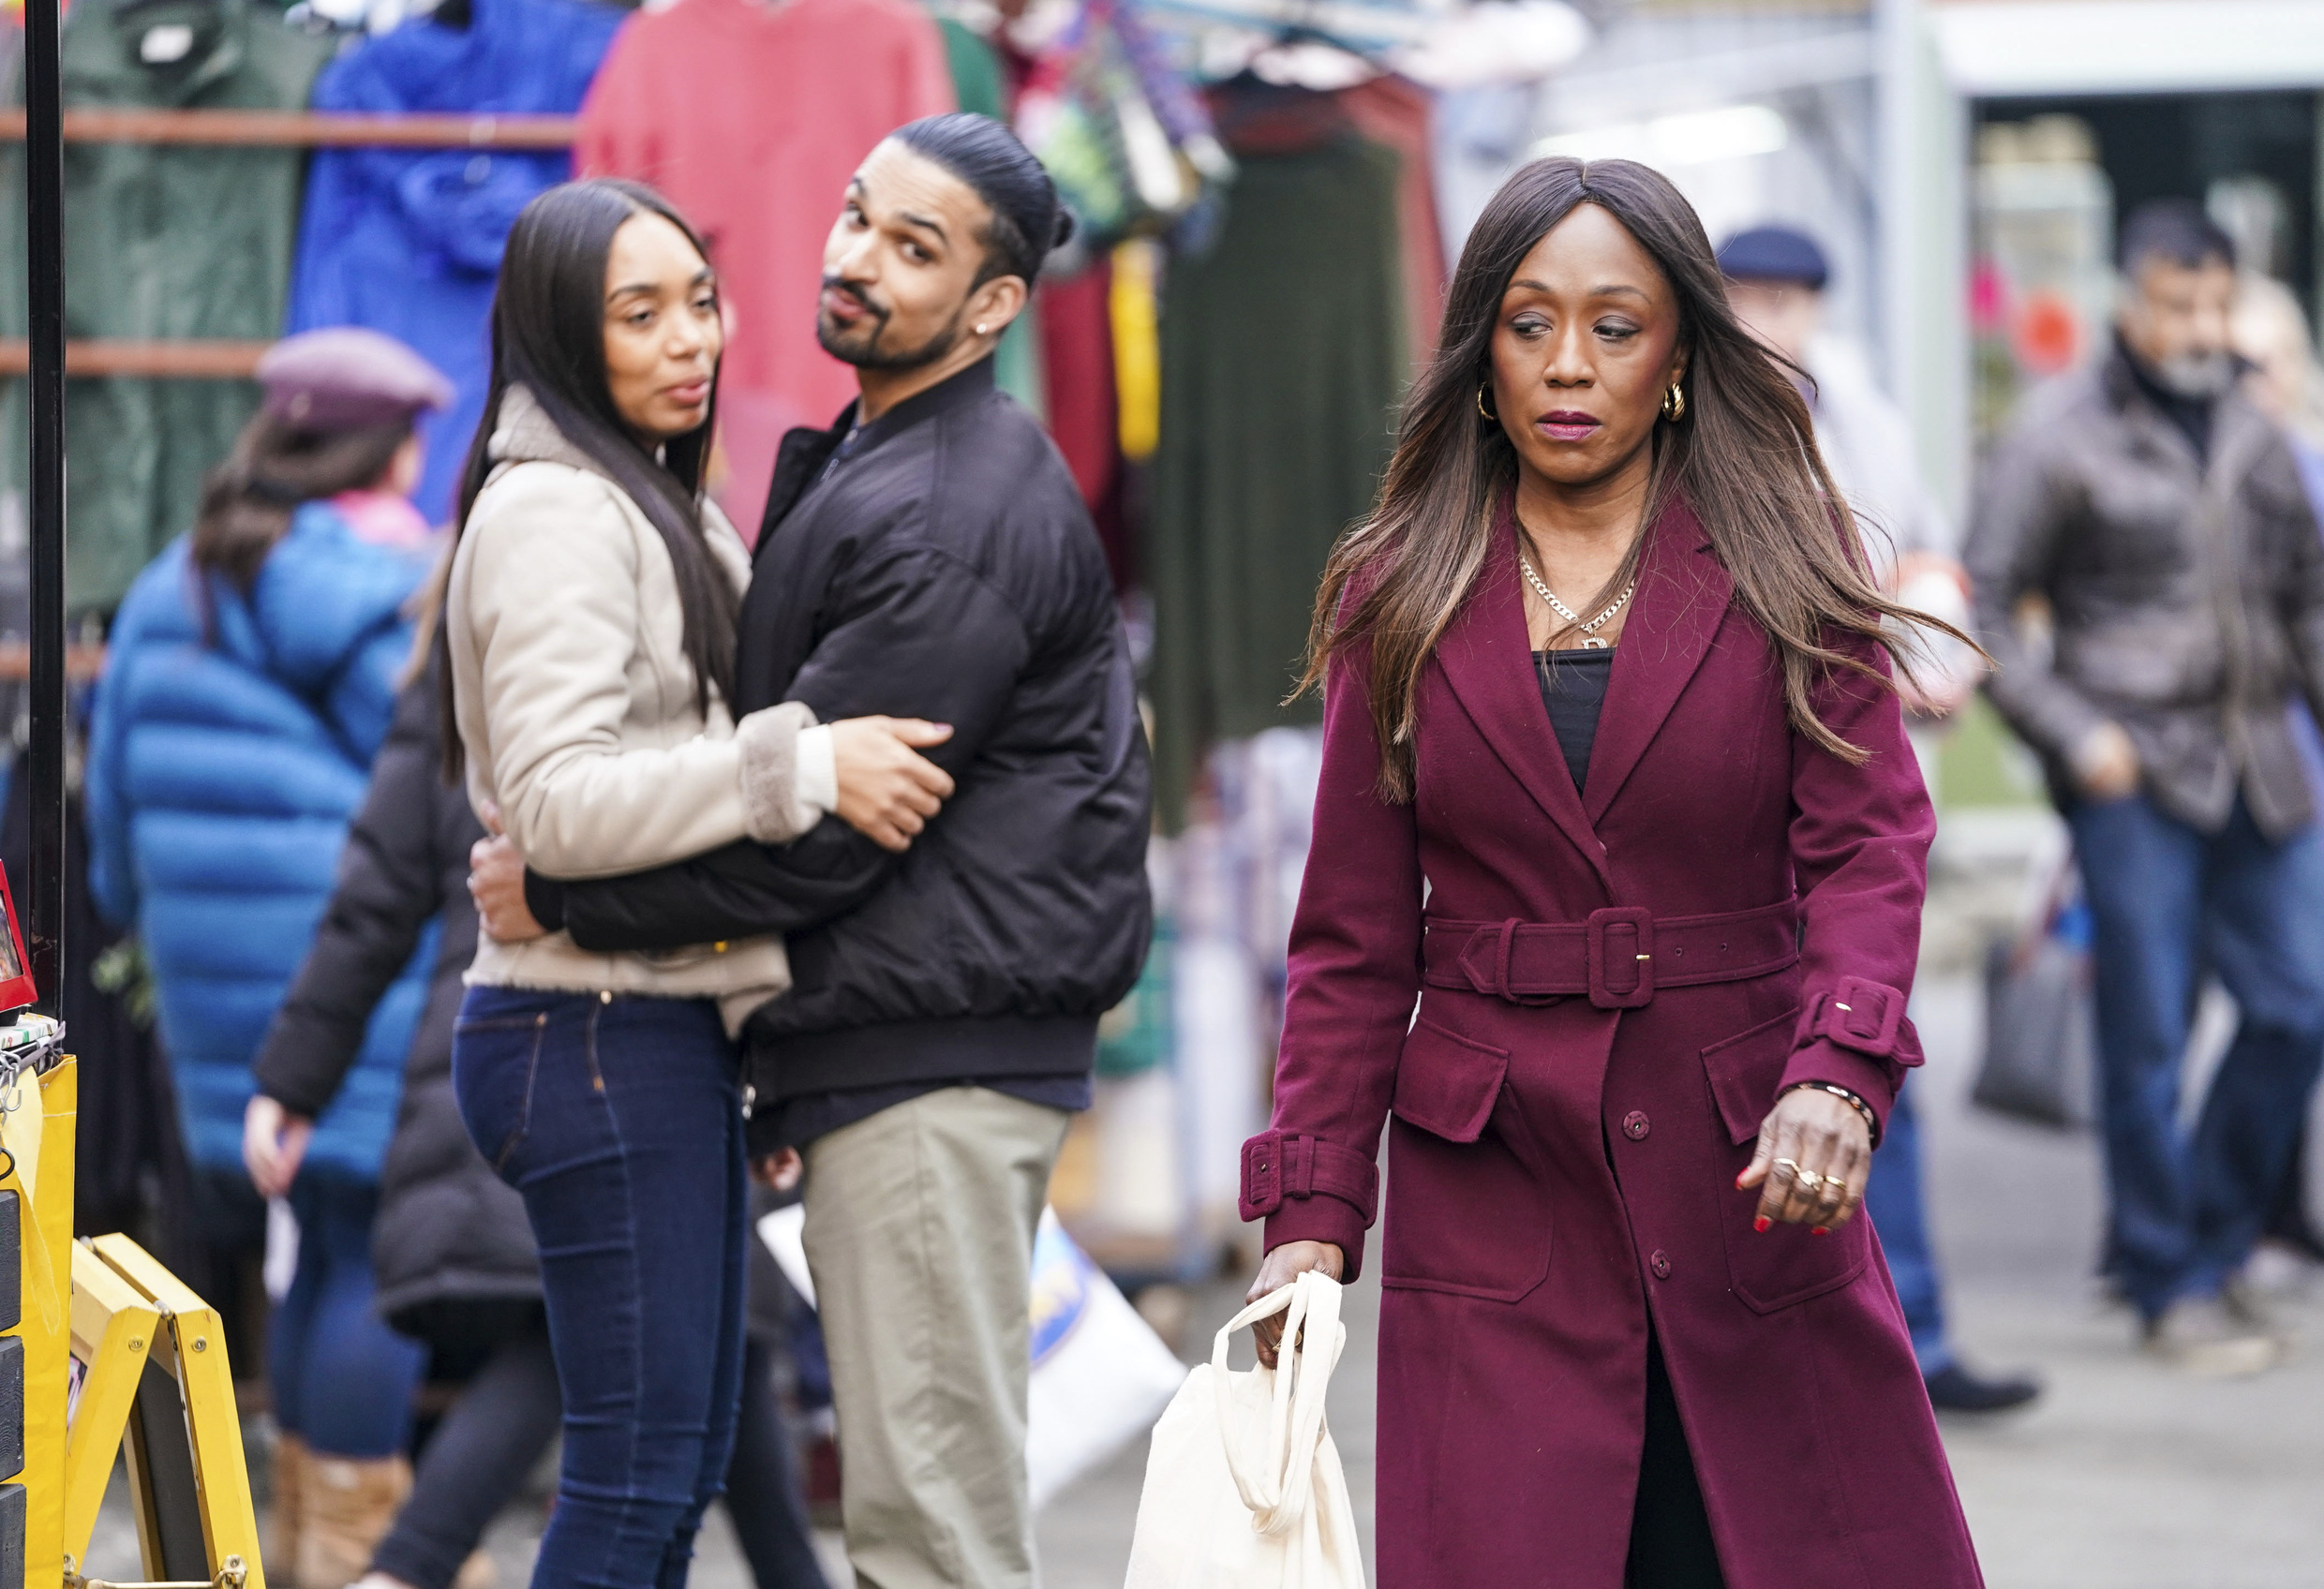 Denise in 'EastEnders' walking through the market while Chelsea and Ravi smirk at her